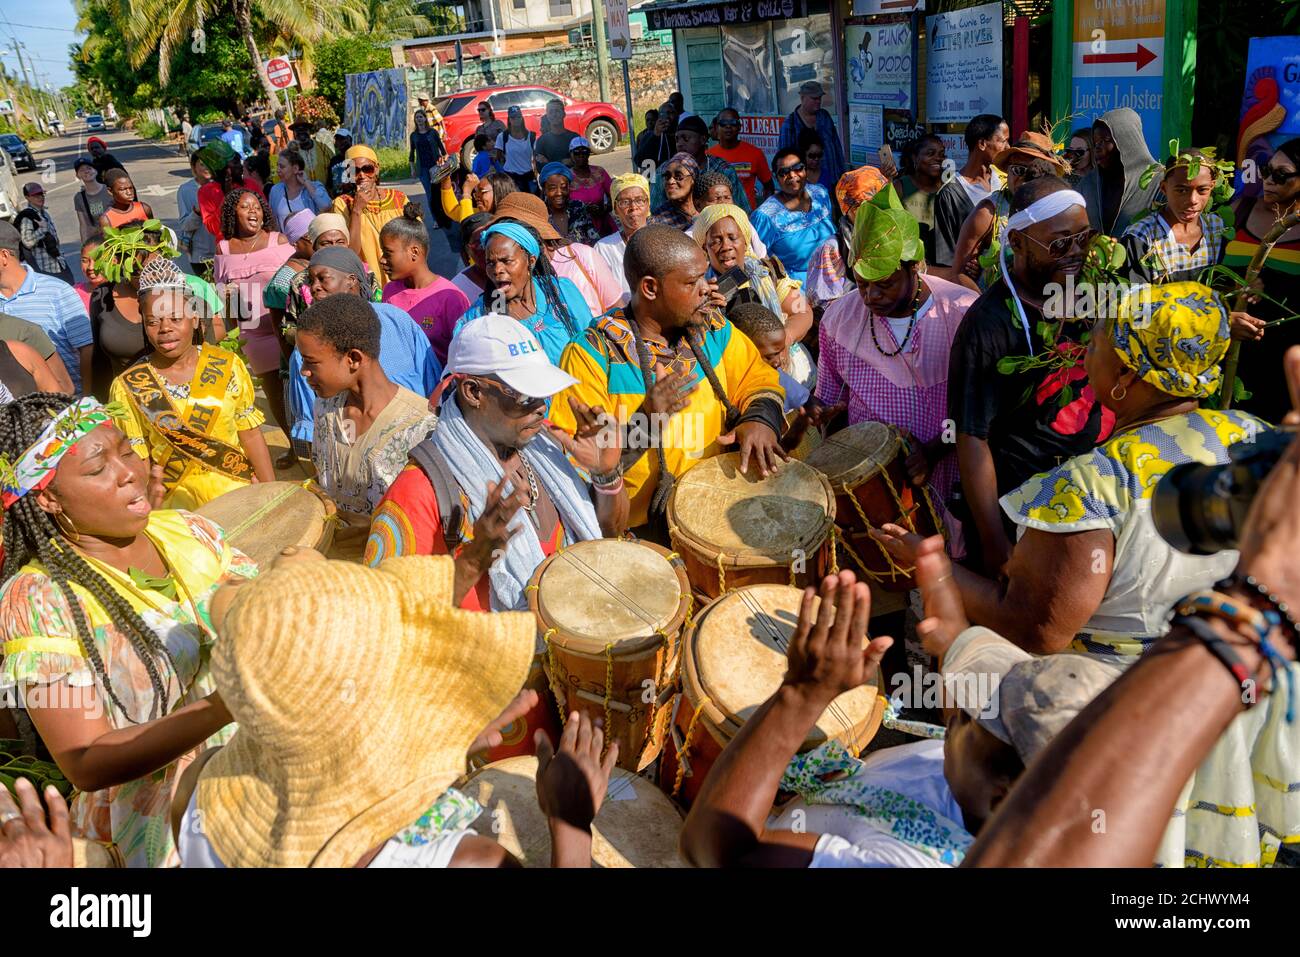 Hopkins Village, Stann Creek District, Belize - November 19, 2019: Garifuna Settlement Day re-enactment and celebration at Hopkins Village. An annual event that marks the arrival of the Garifuna people into Belize. Stock Photo